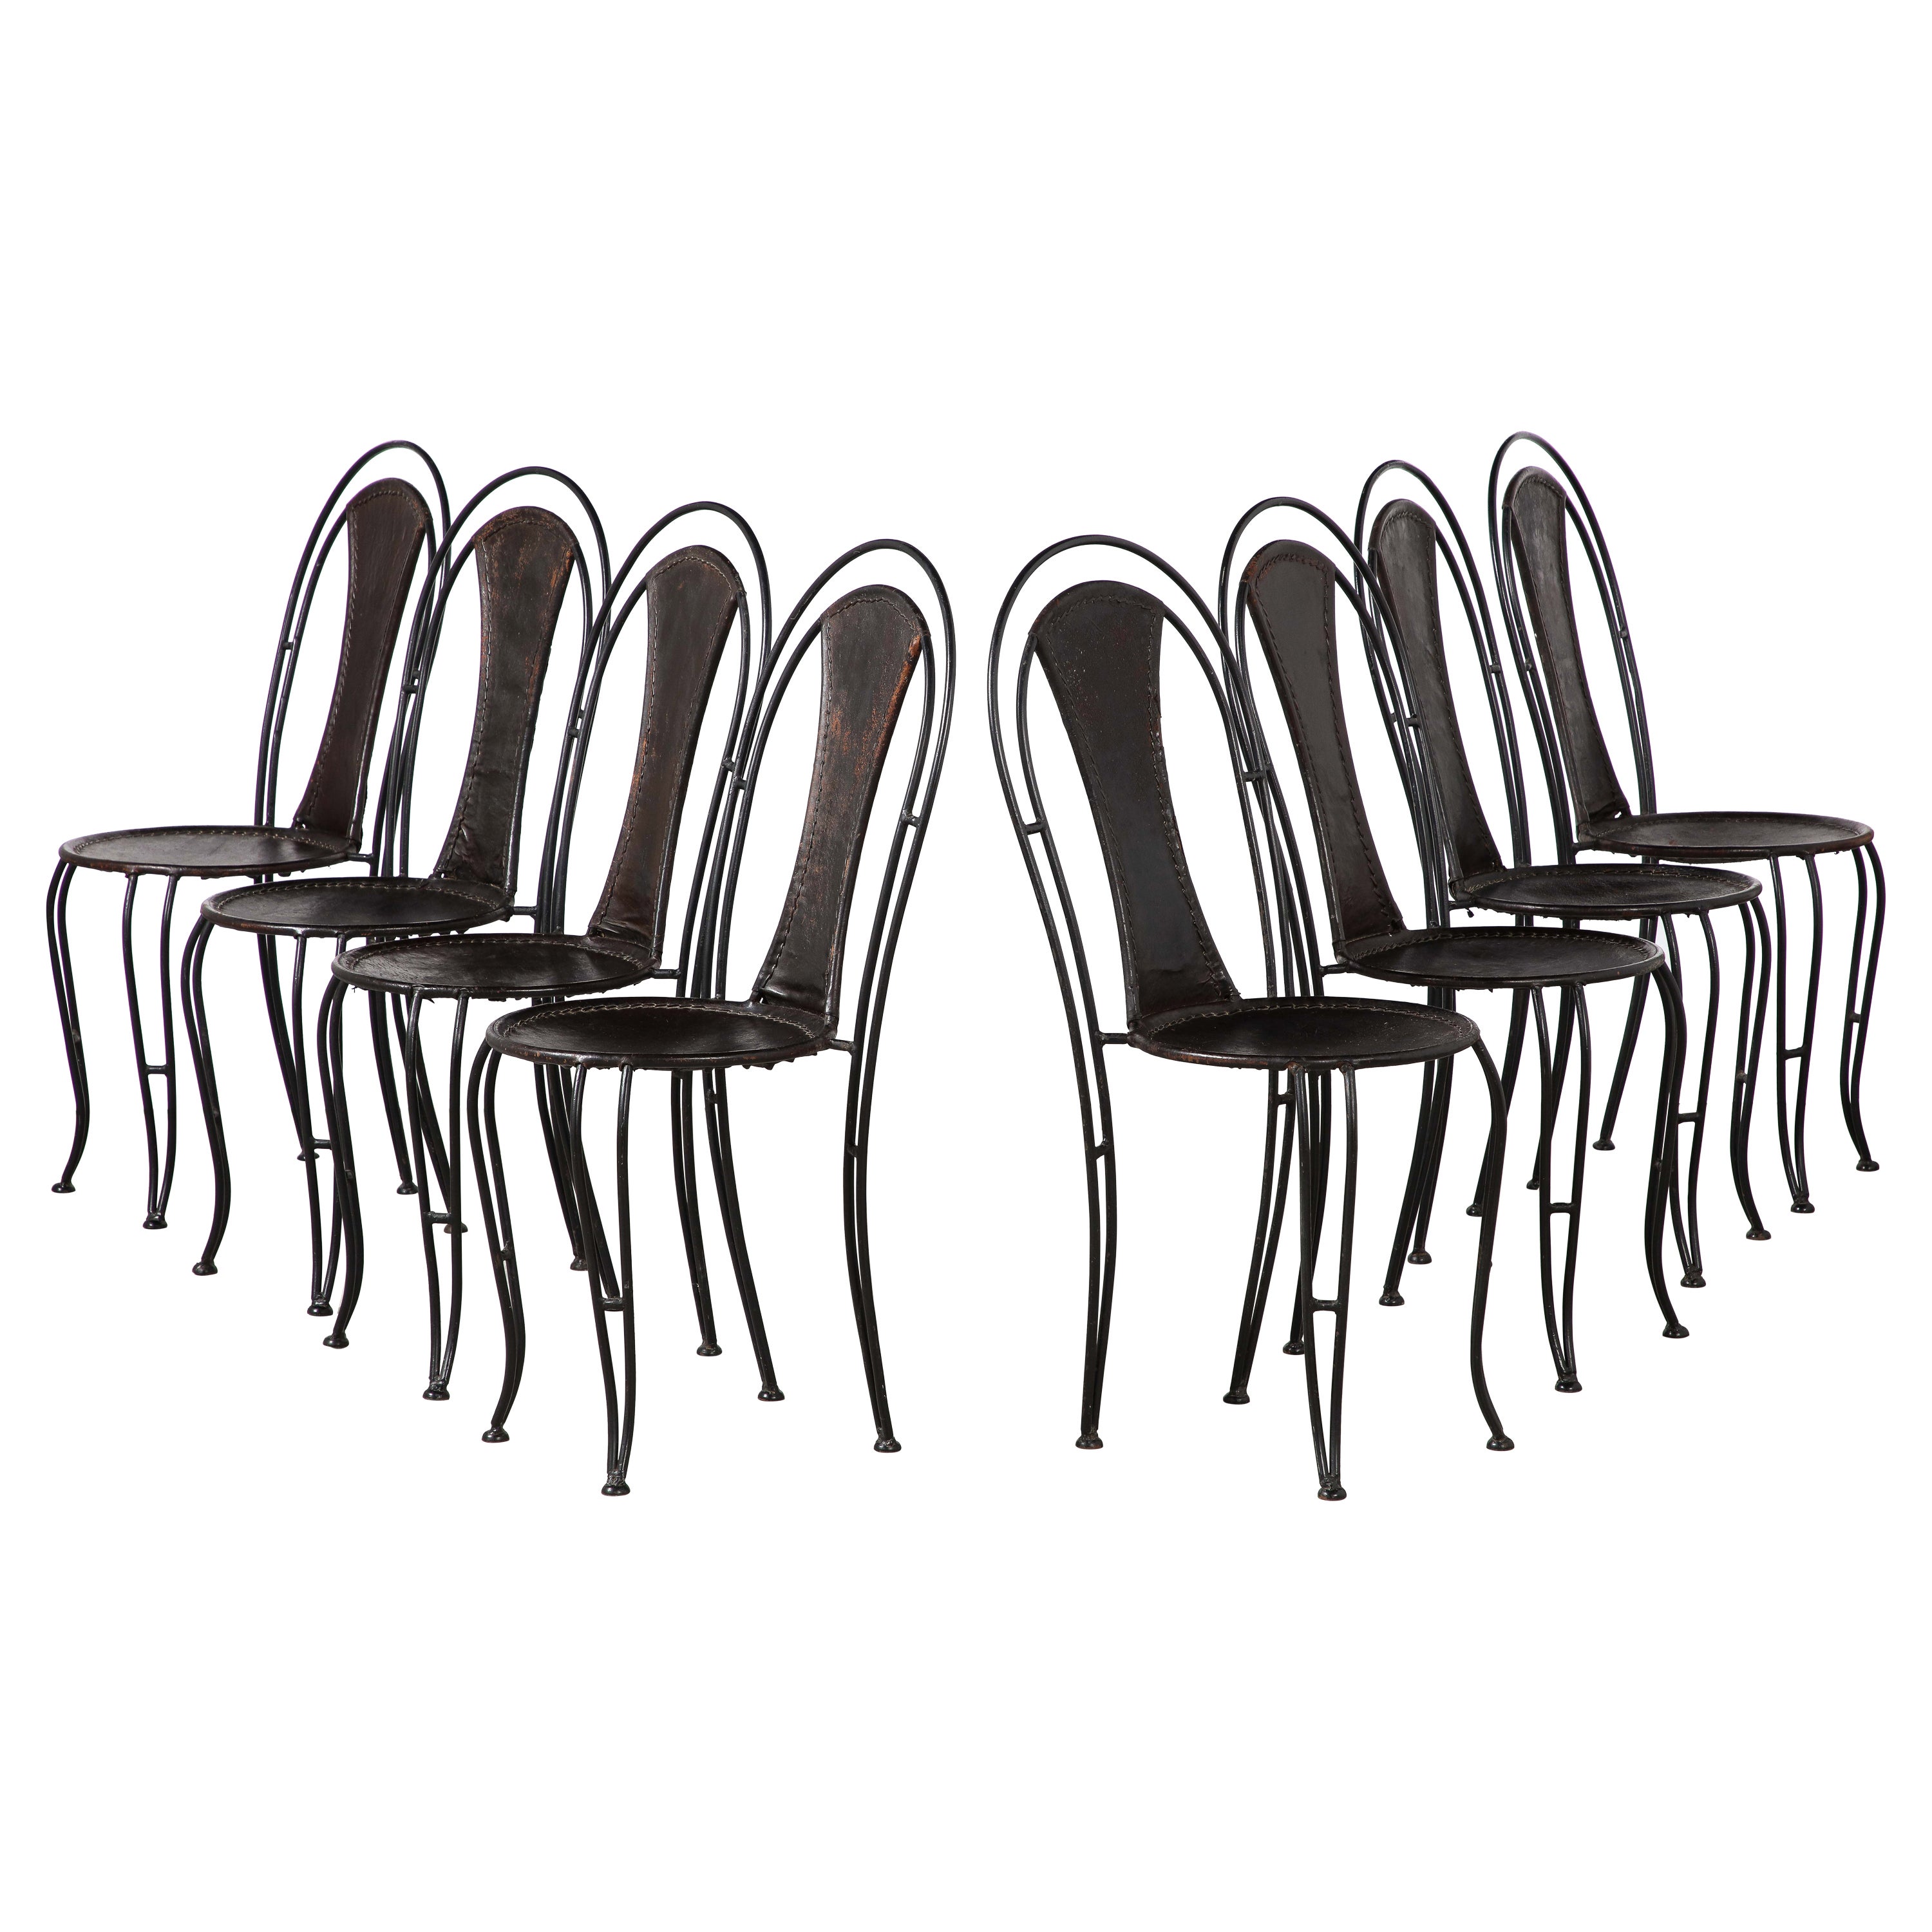 Set of 8 Italian Leather and Metal Bistro Dining Chairs, Circa 1960 For Sale